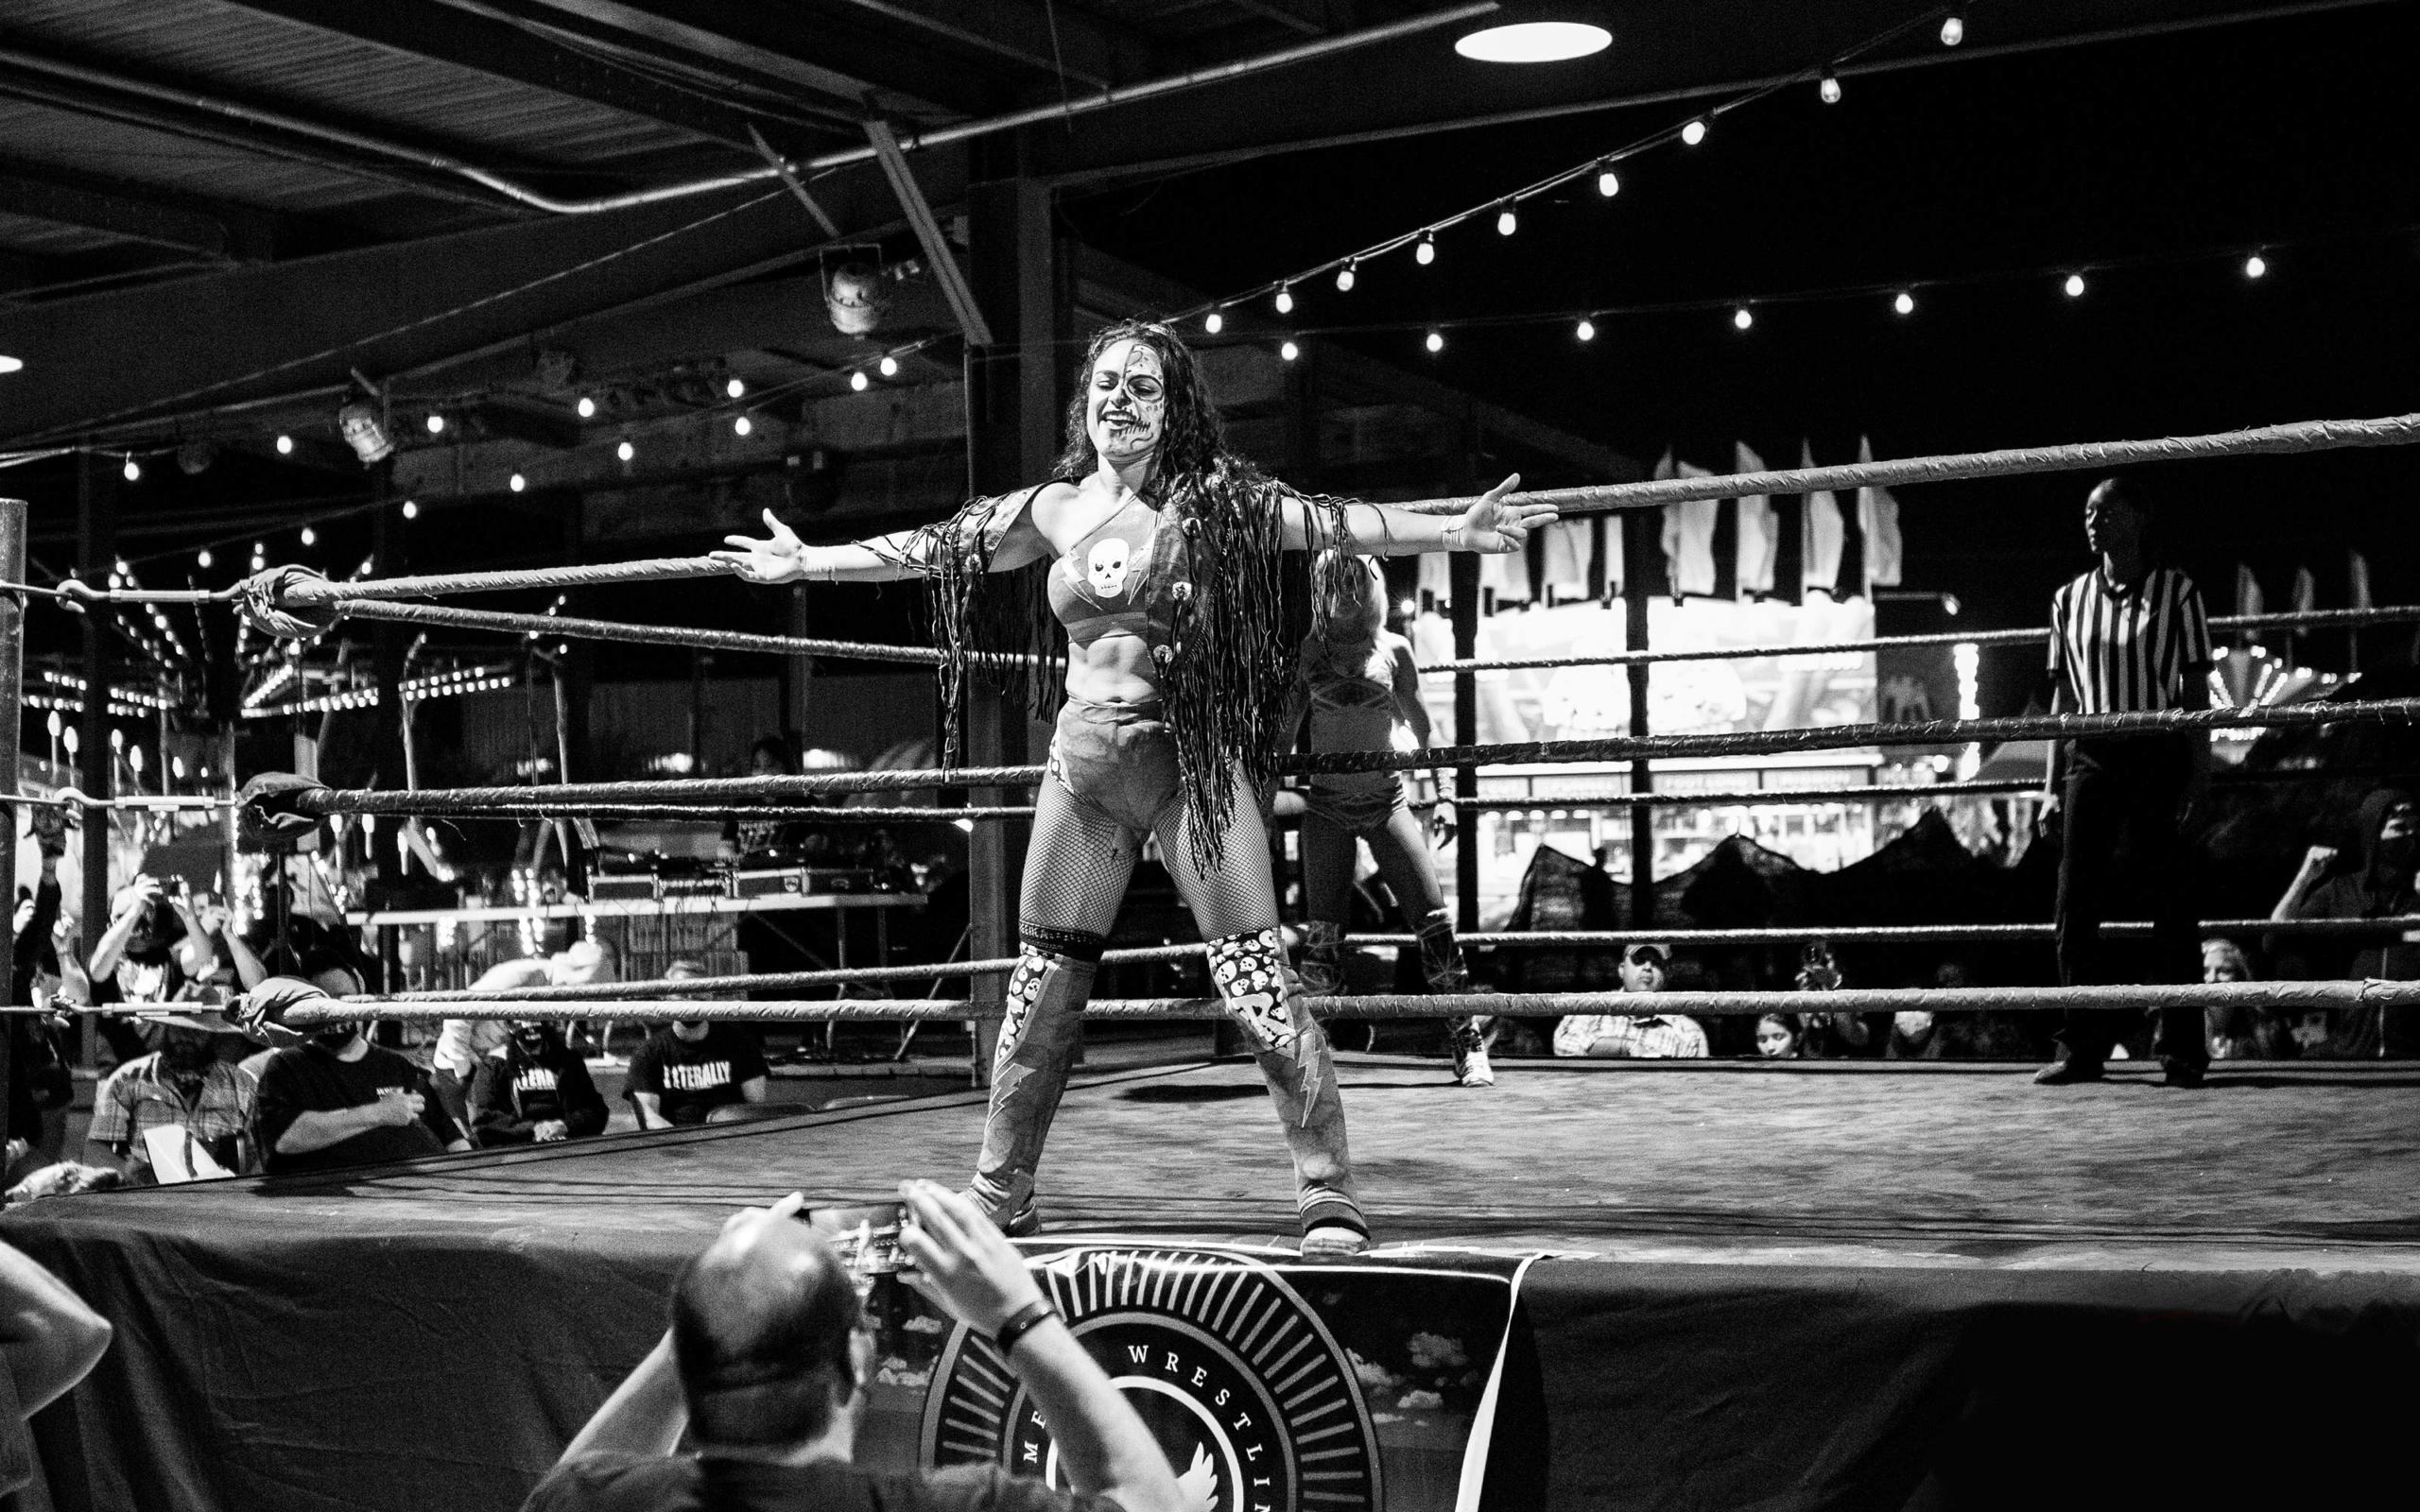 Texass Newest Wrestling Venture Elevates Women Inside the Ring and Behind the Scenes